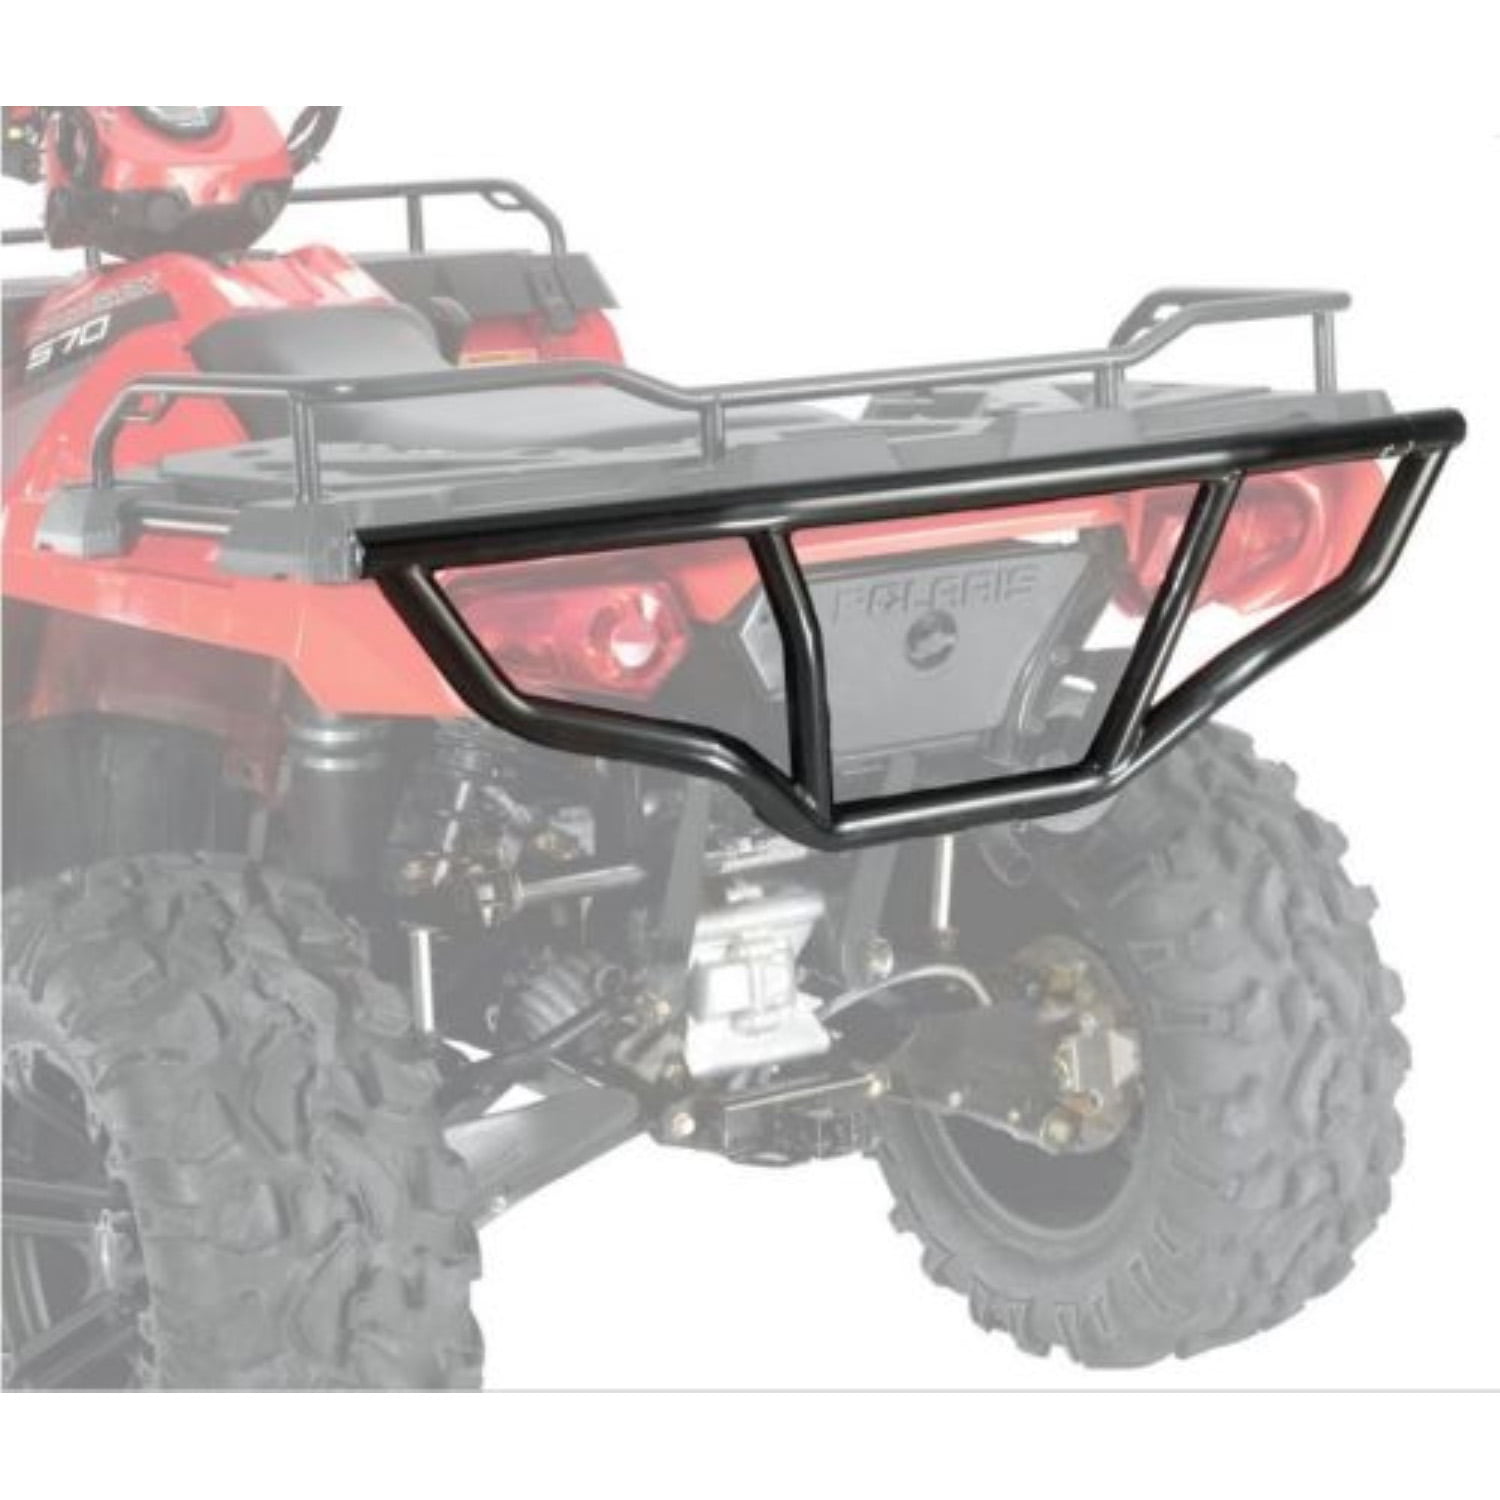 2015 TUSK QUIET GLIDE UHMW Heavy Duty 3/8 Thick Skid Plate Includes oil filter. POLARIS RZR XP 1000 2014